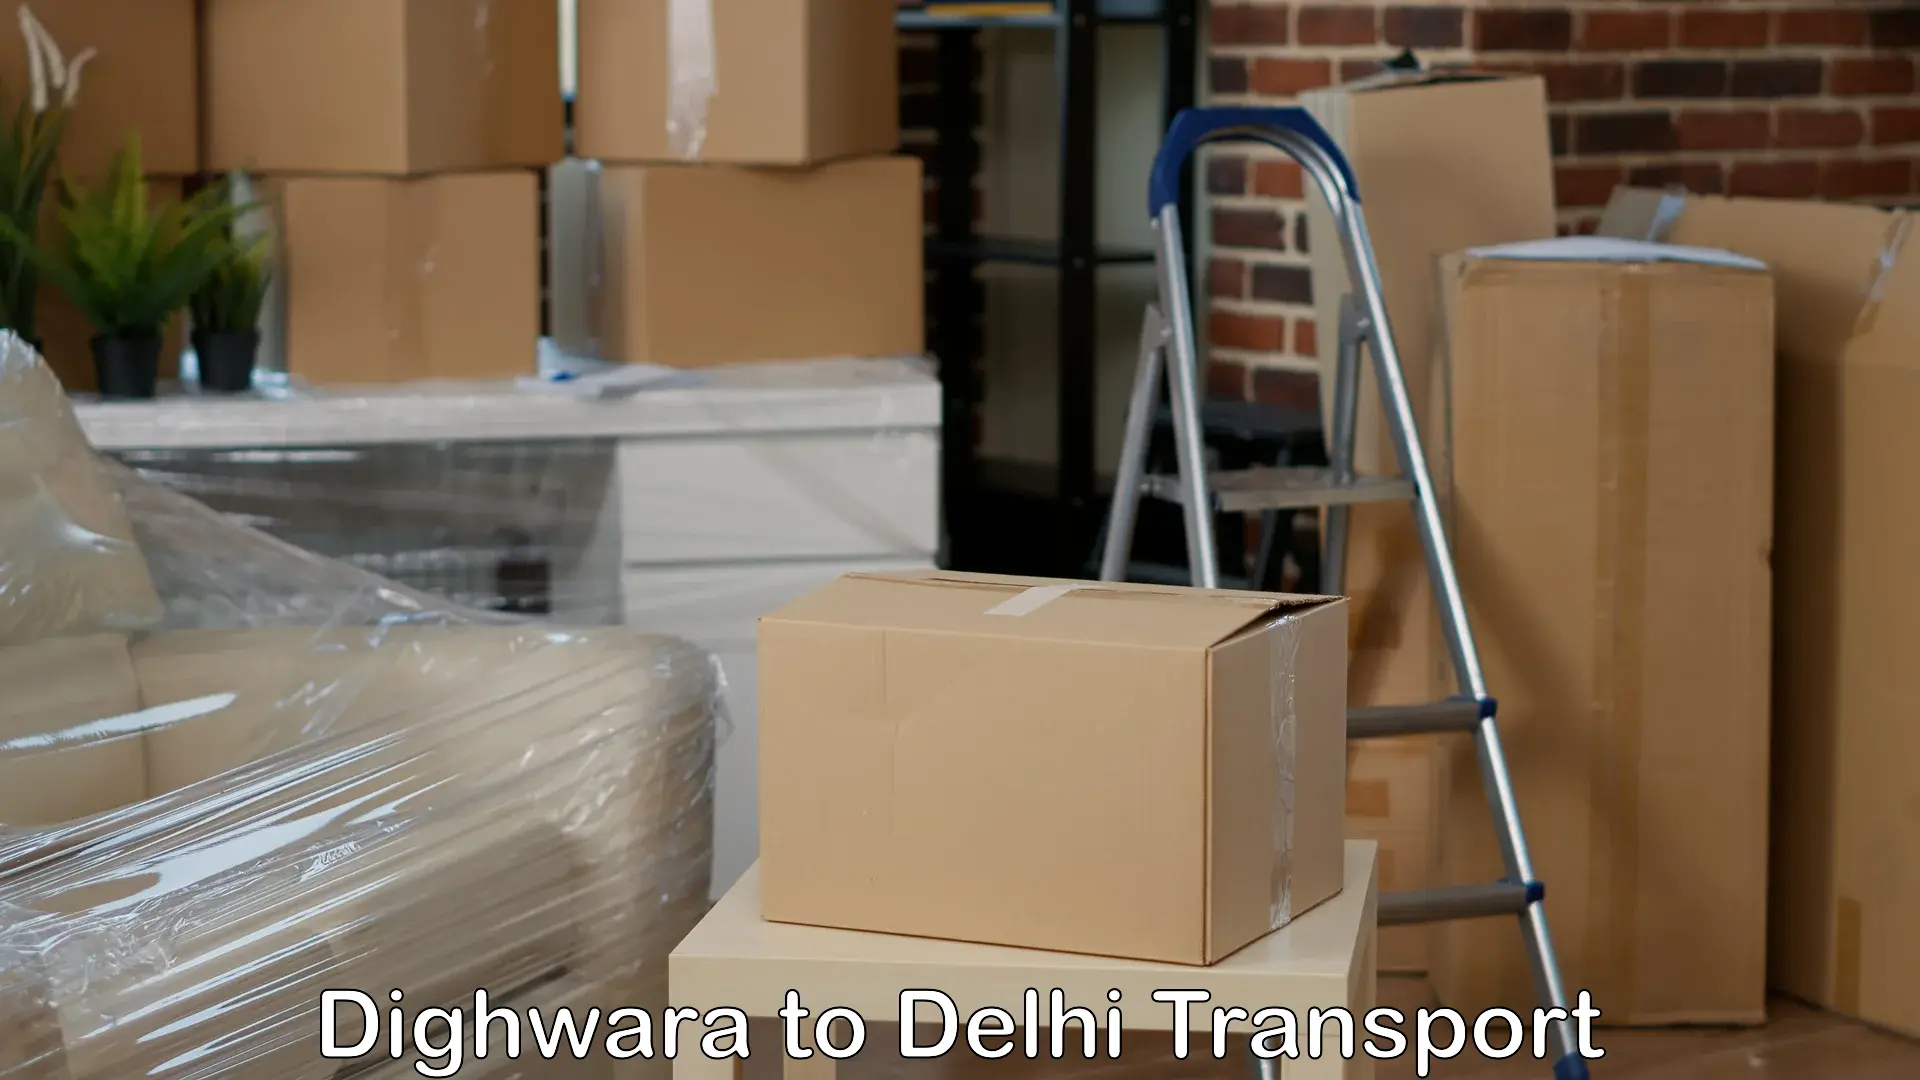 Delivery service Dighwara to NCR